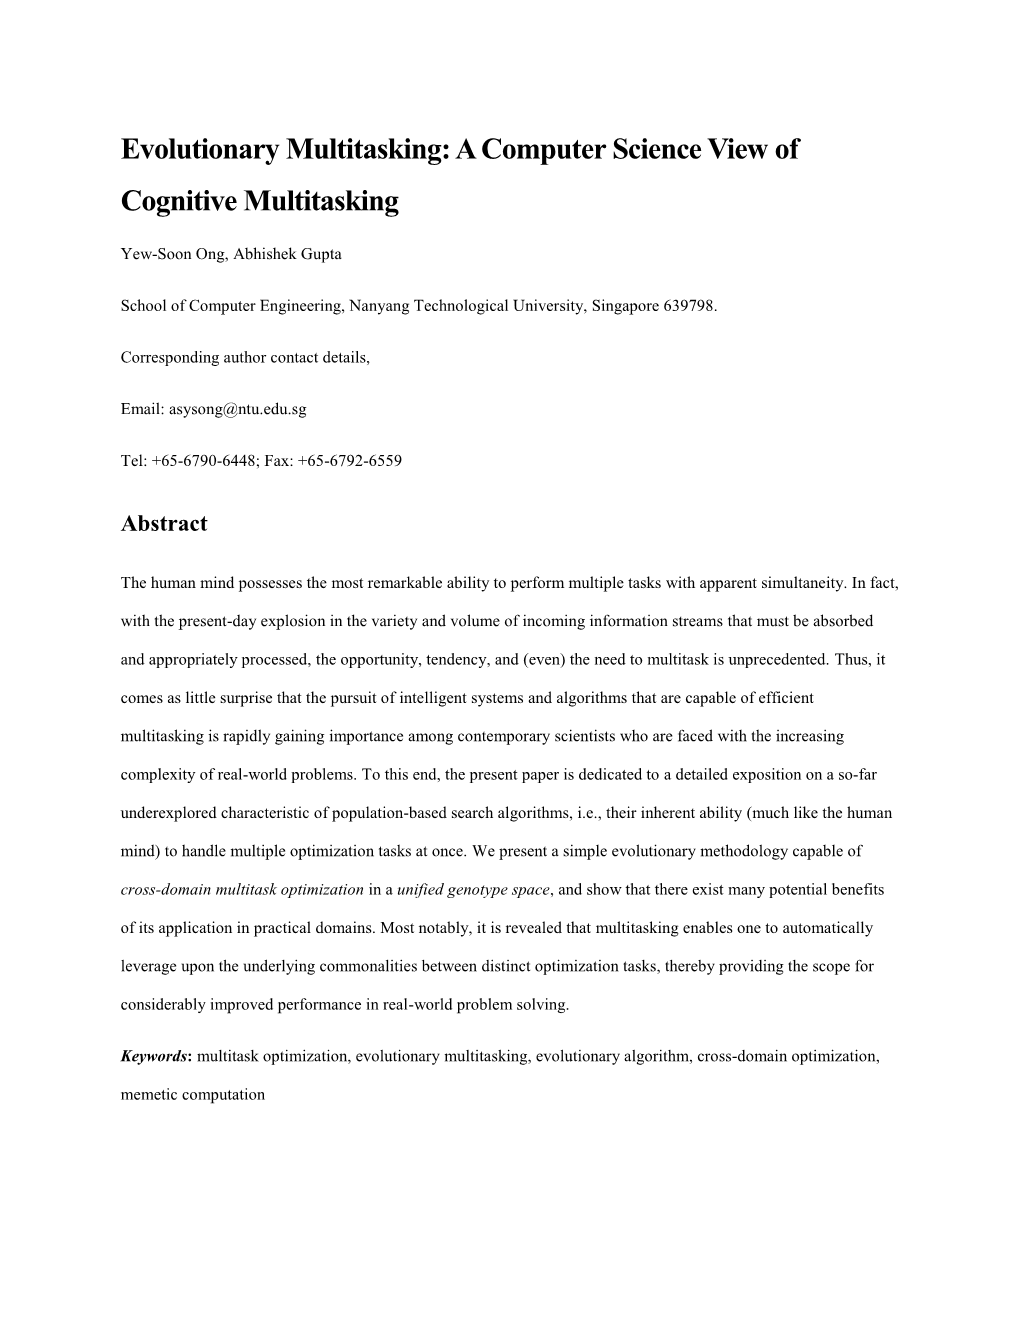 Evolutionary Multitasking: a Computer Science View of Cognitive Multitasking